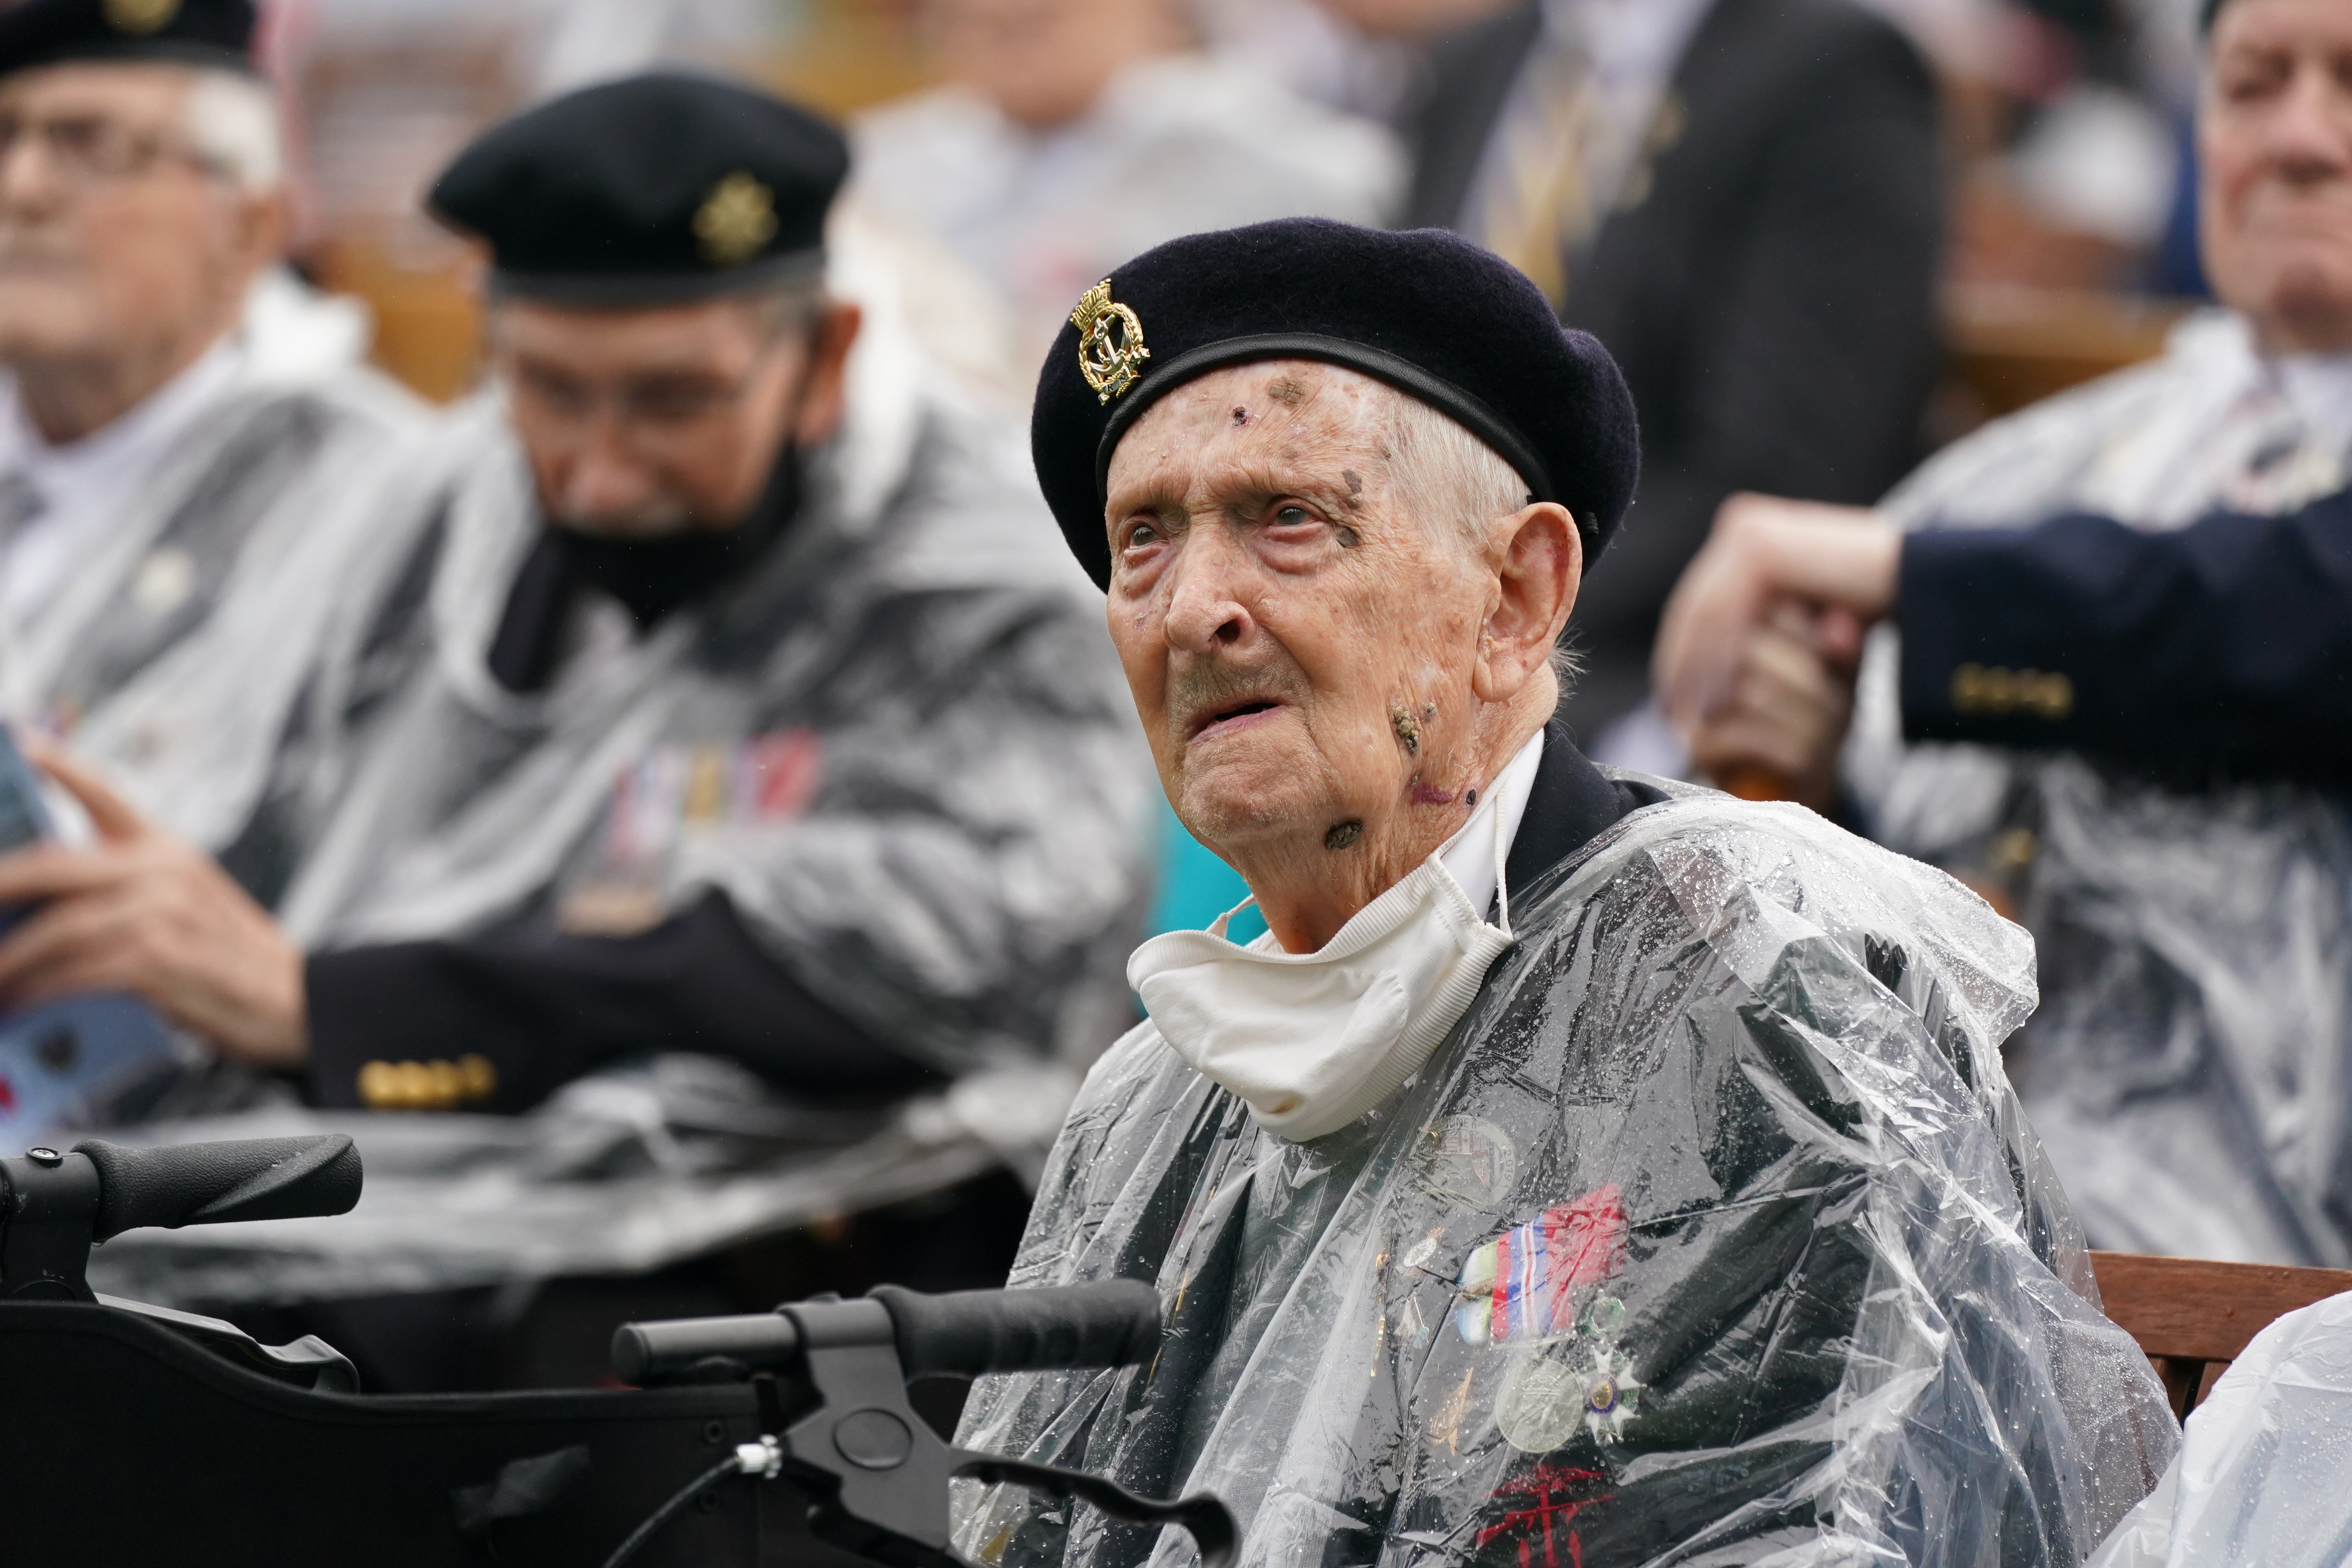 Veterans watch the official opening of the British Normandy Memorial in France (Jakob King/PA)